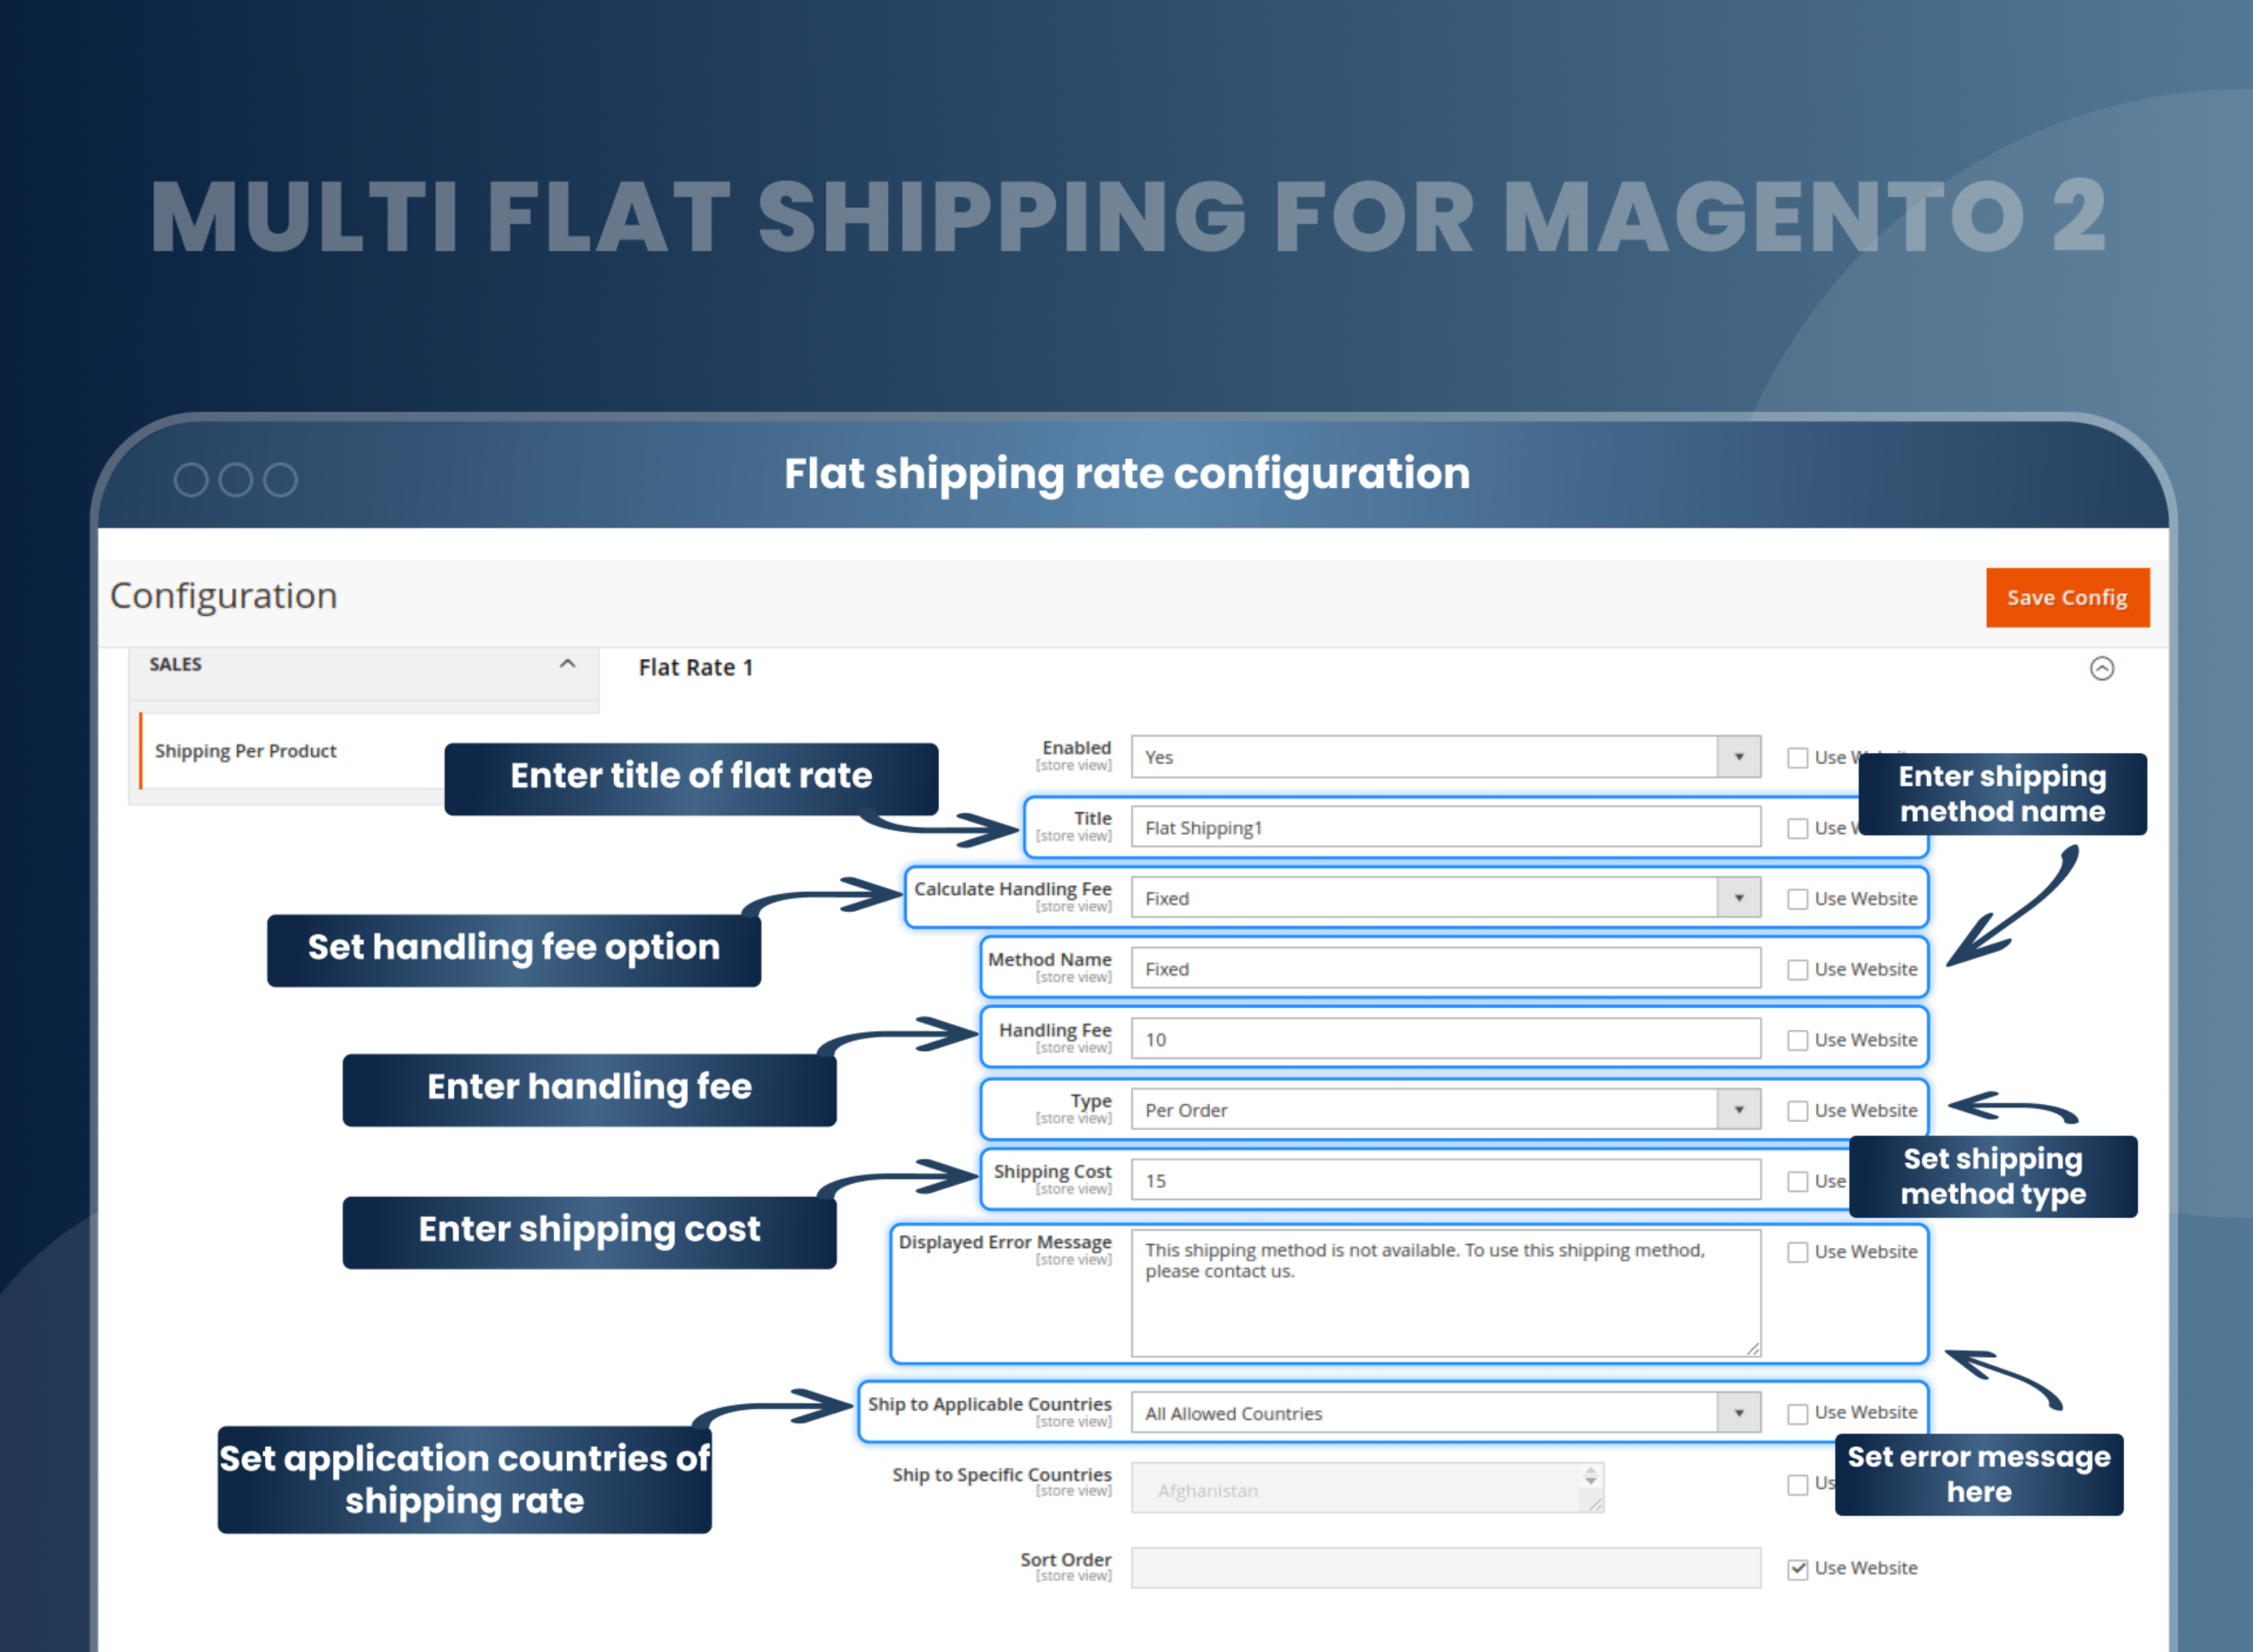 Flat shipping rate configuration